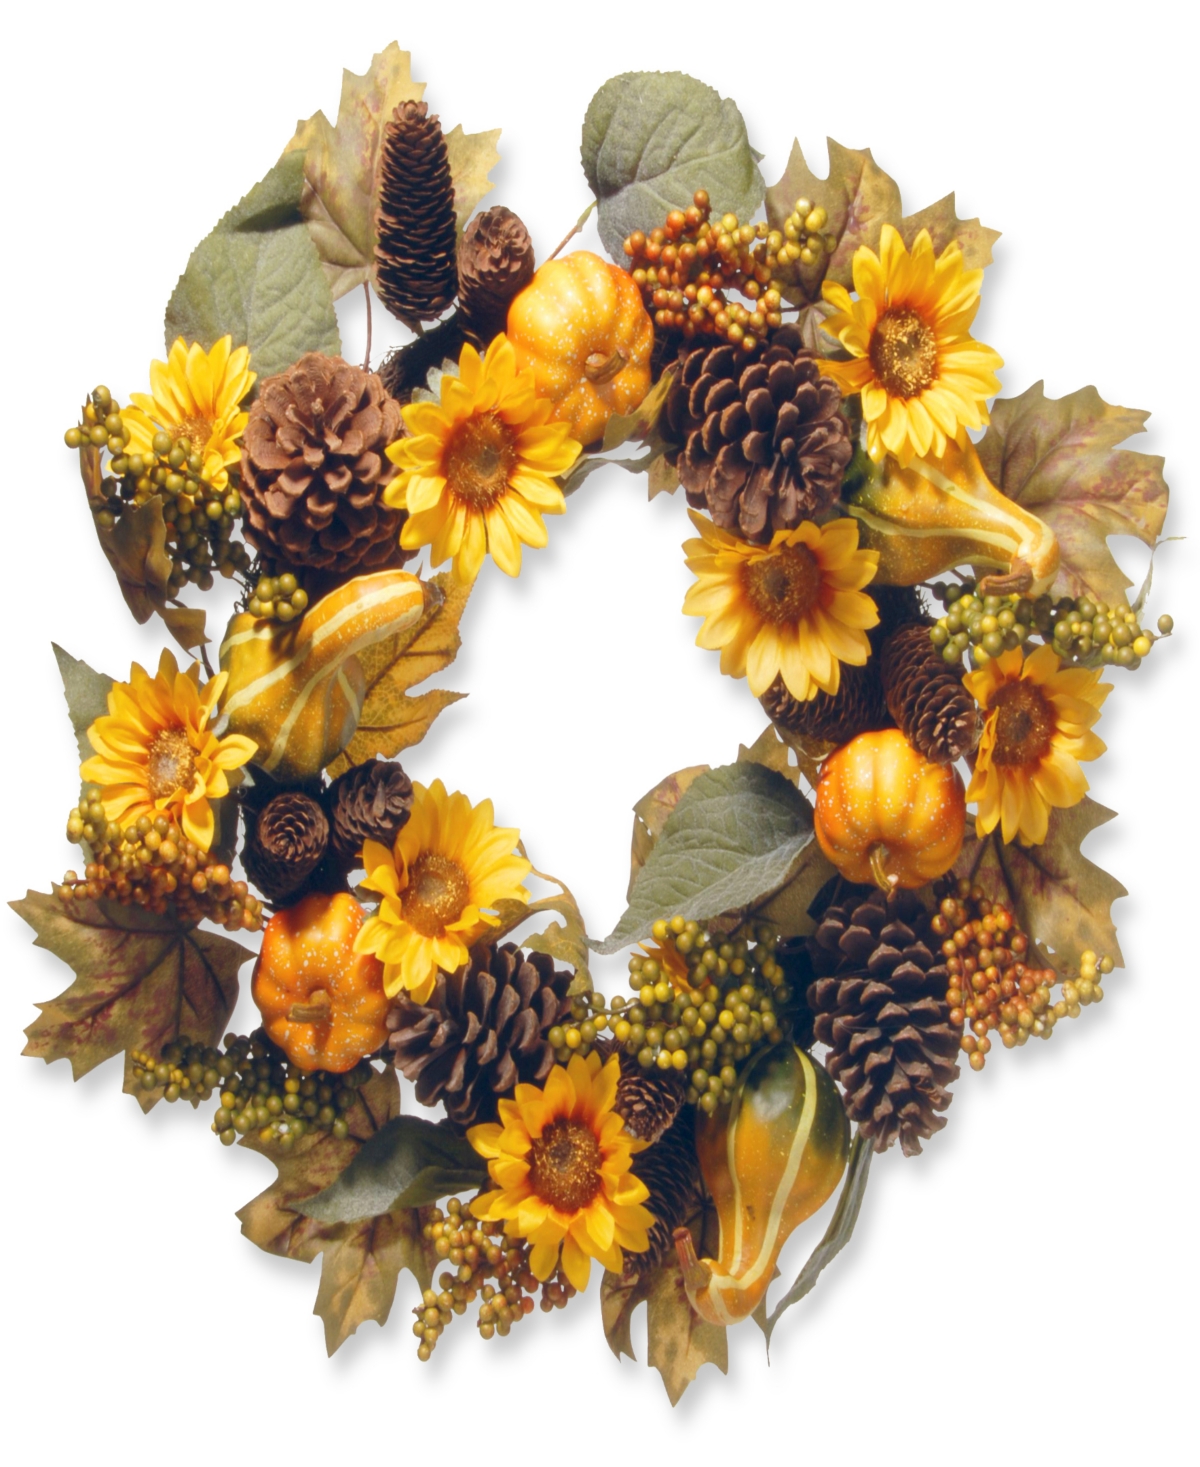 Shop National Tree Company 22" Artificial Autumn Wreath, Decorated With Pumpkins, Gourds, Pinecones, Sunflowers, Berry Clusters In Yellow